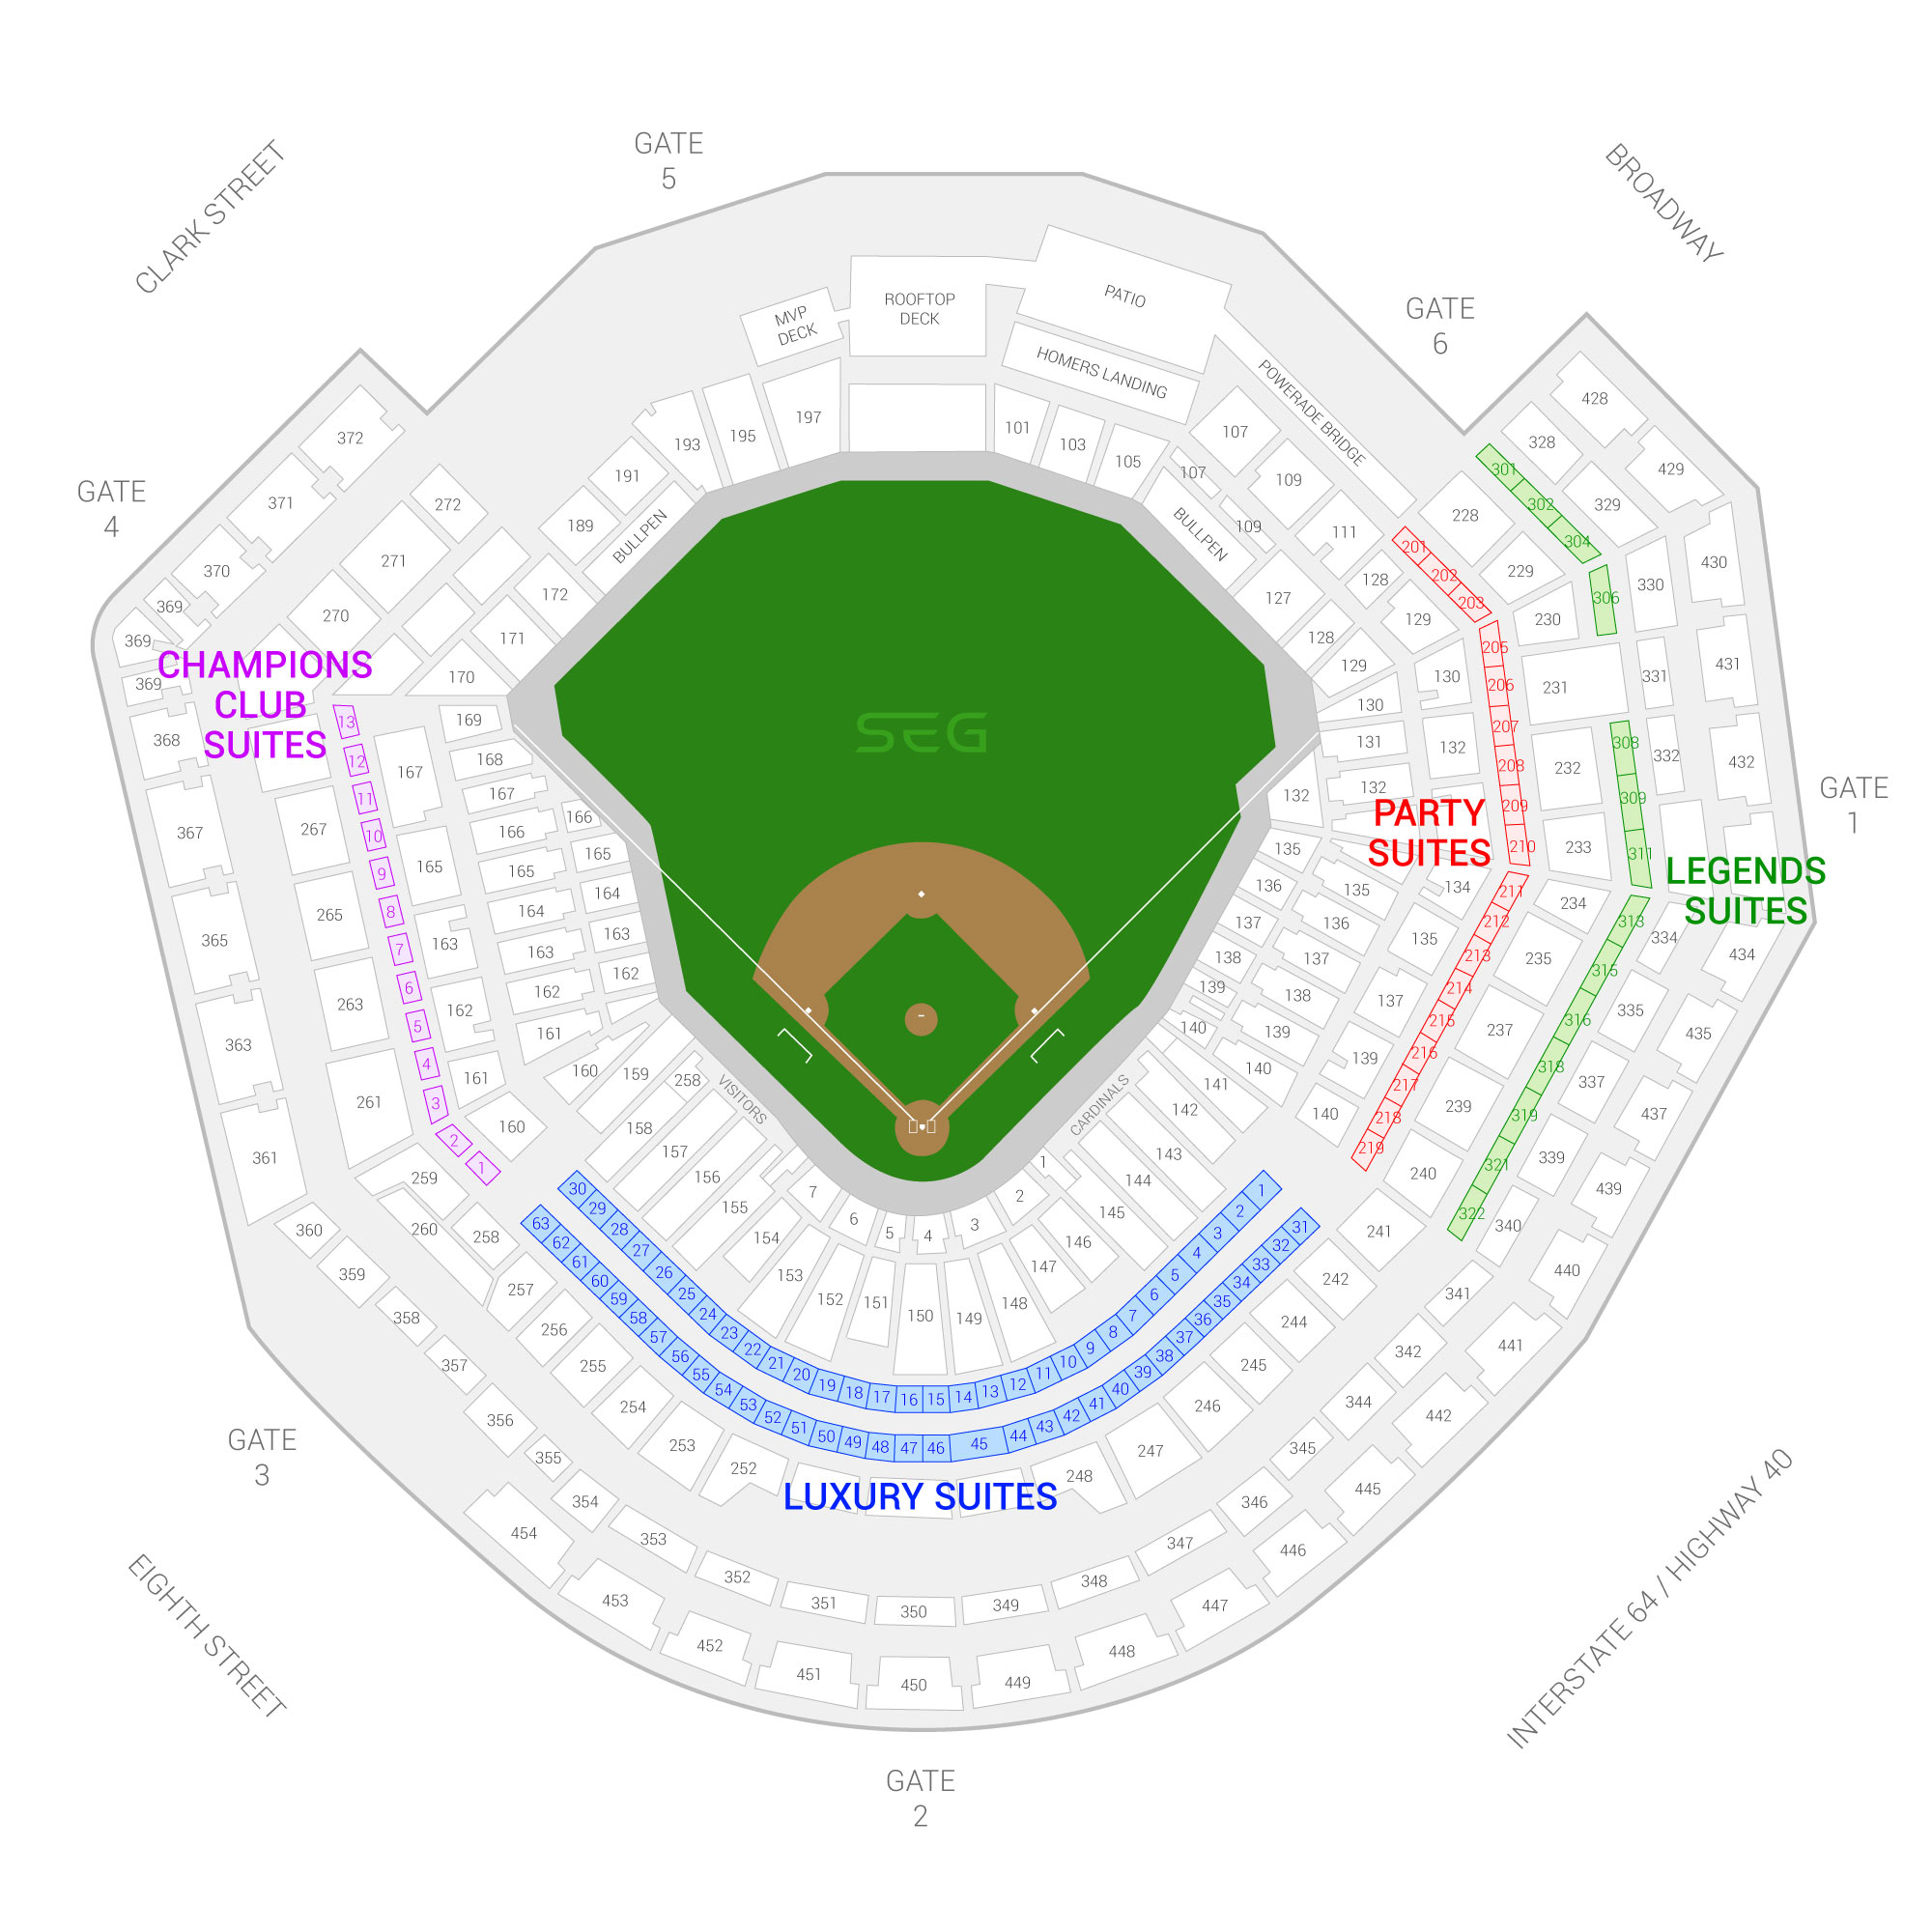 Busch Stadium / St. Louis Cardinals Suite Map and Seating Chart